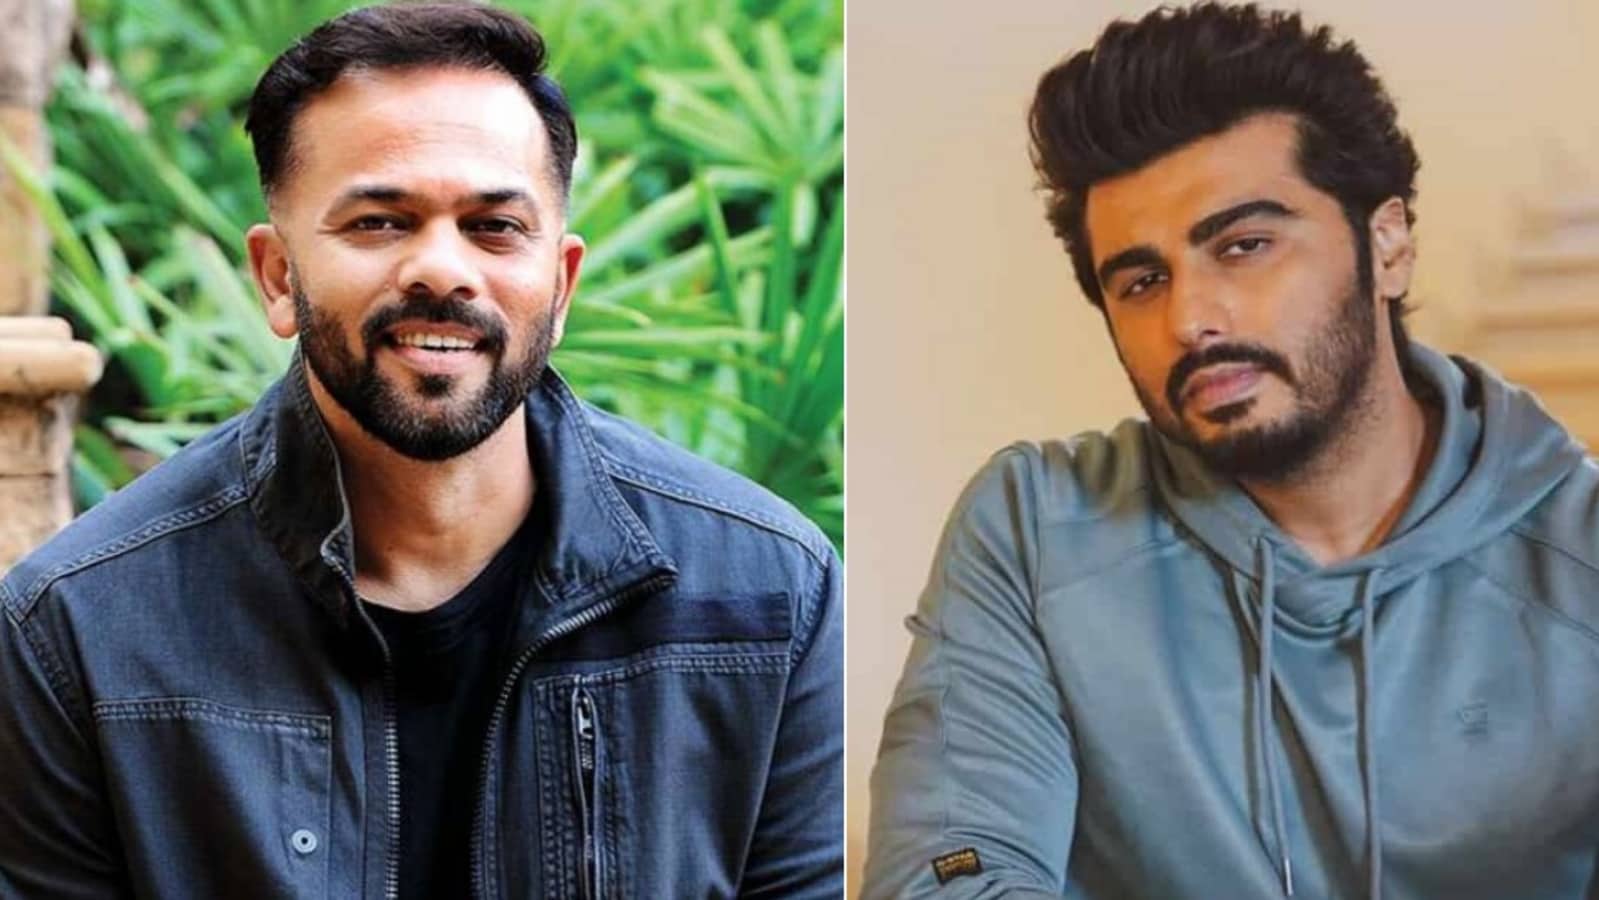 Arjun Kapoor, Rohit Shetty receive thanks from Assam CM Himanta Biswa Sarma for donating ₹5 lakh for flood relief